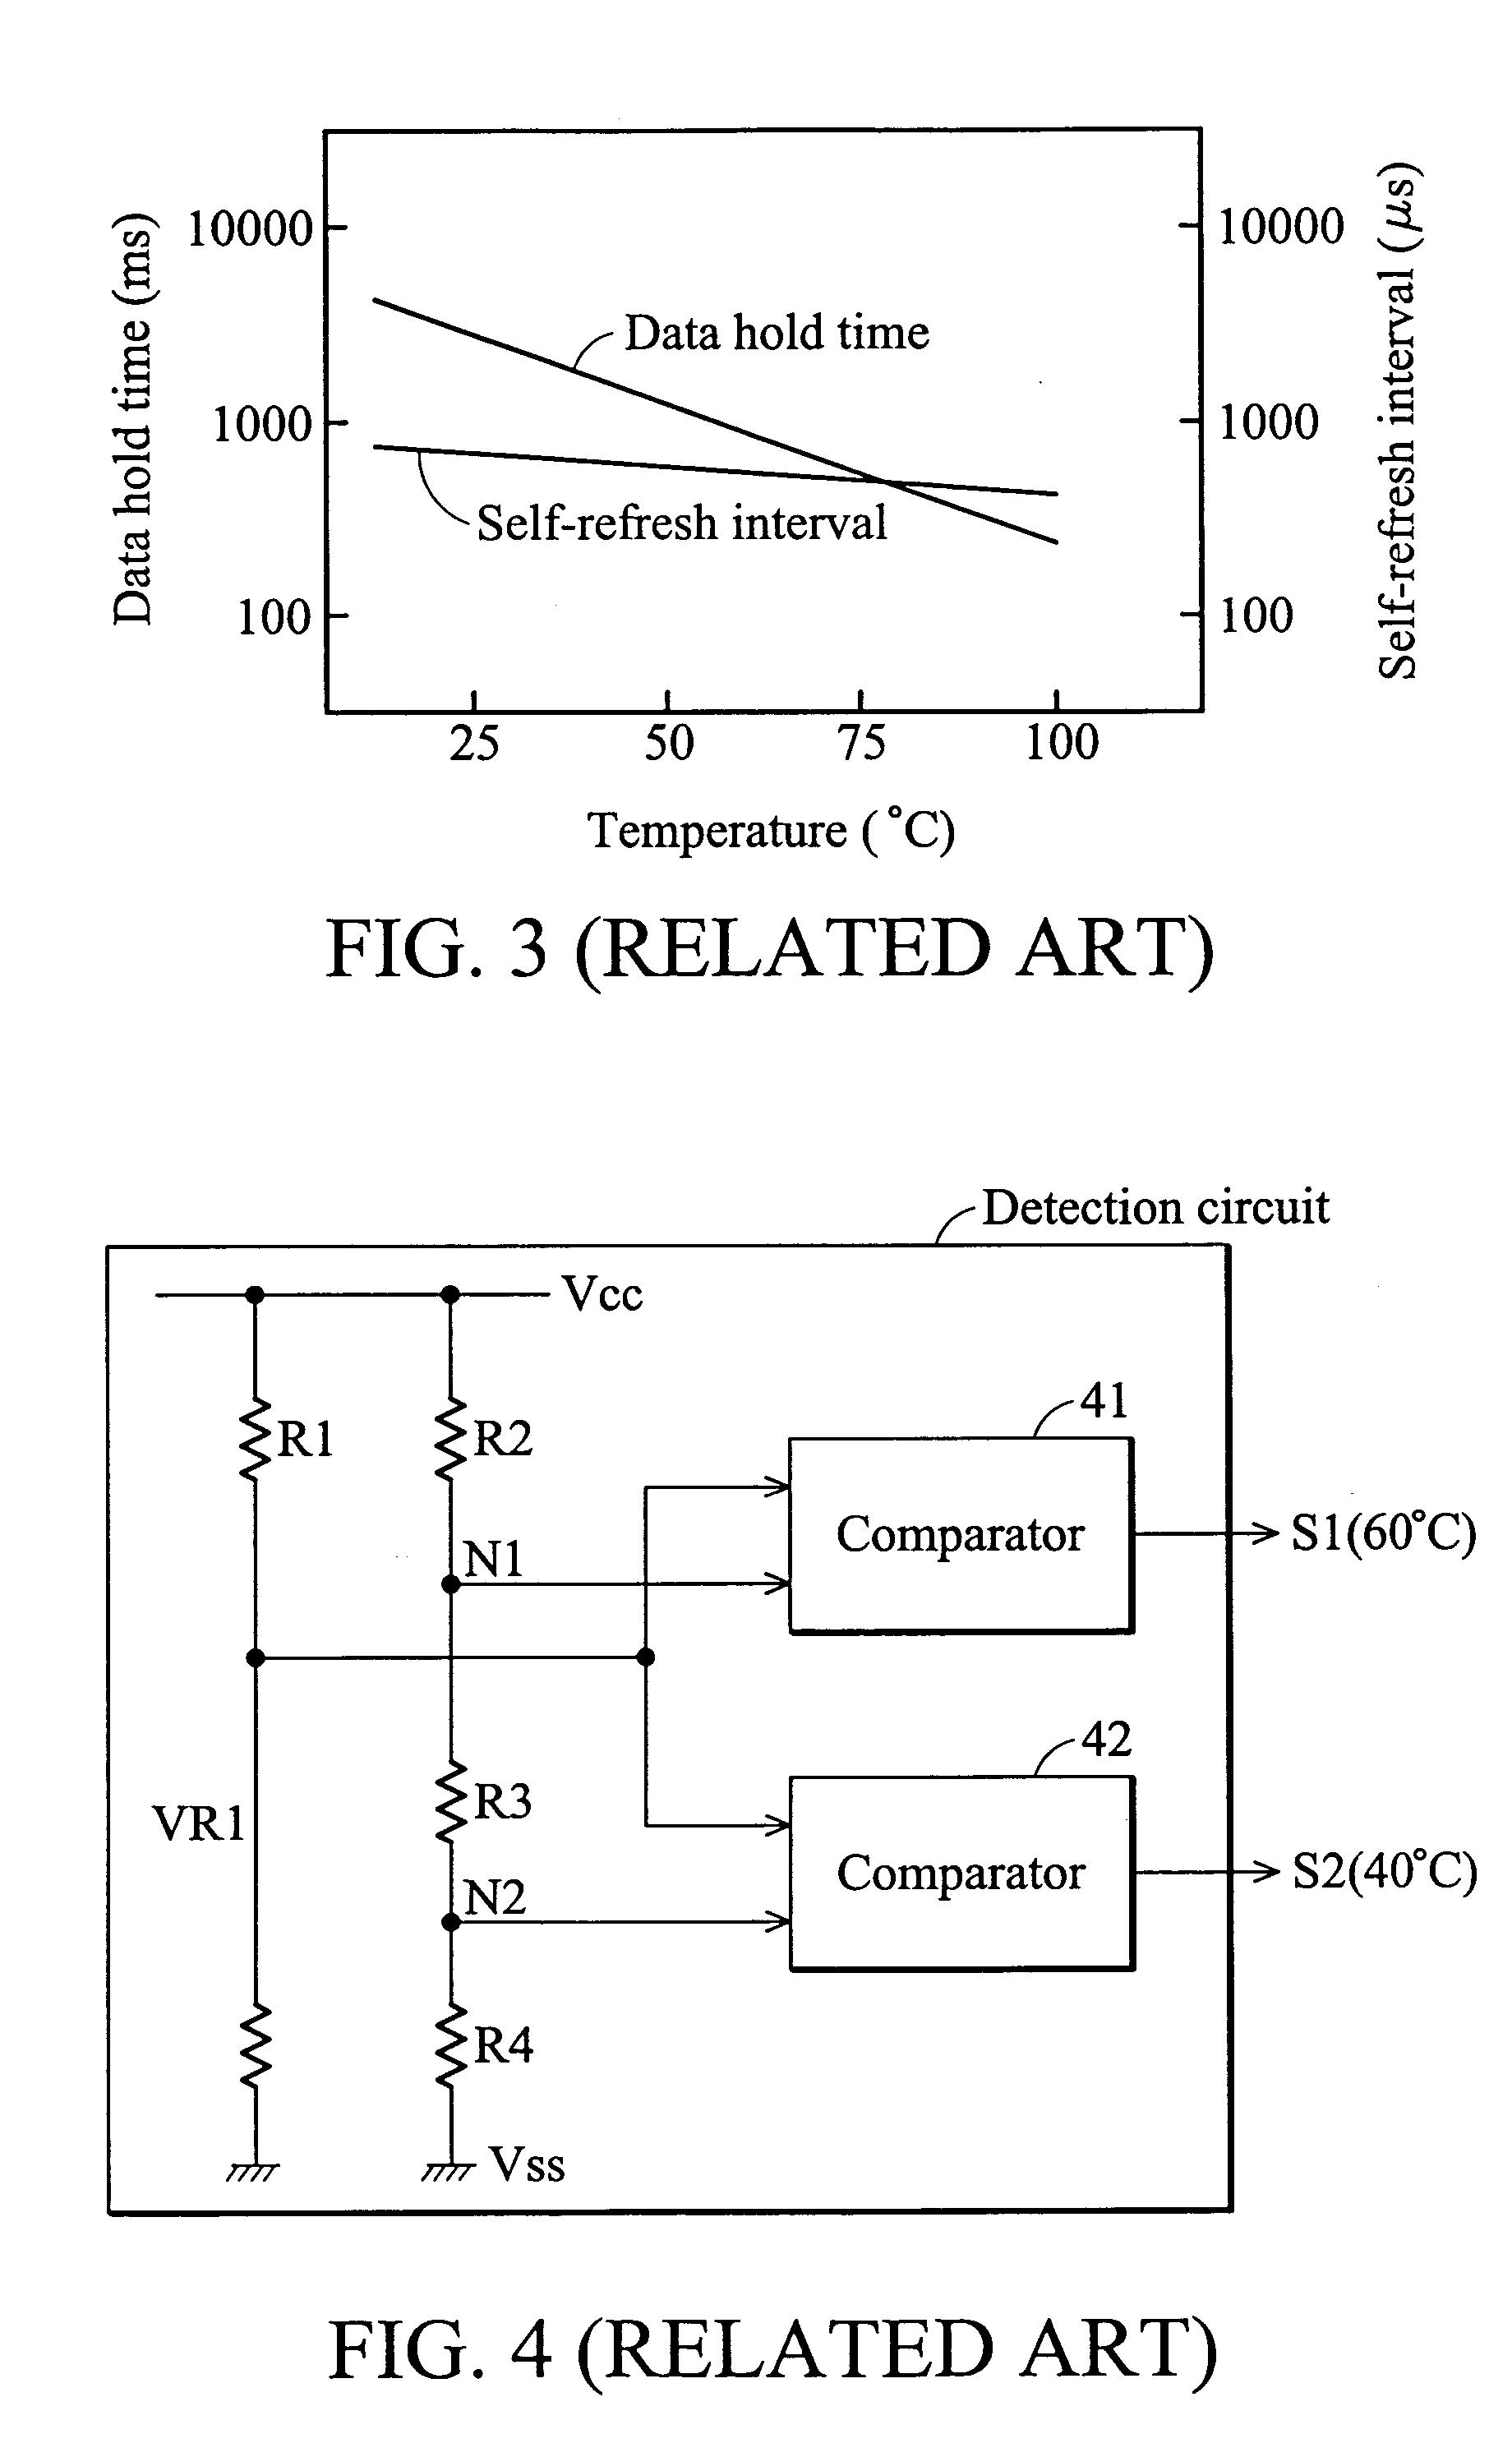 Temperature detecting circuit for controlling a self-refresh period of a semiconductor memory device